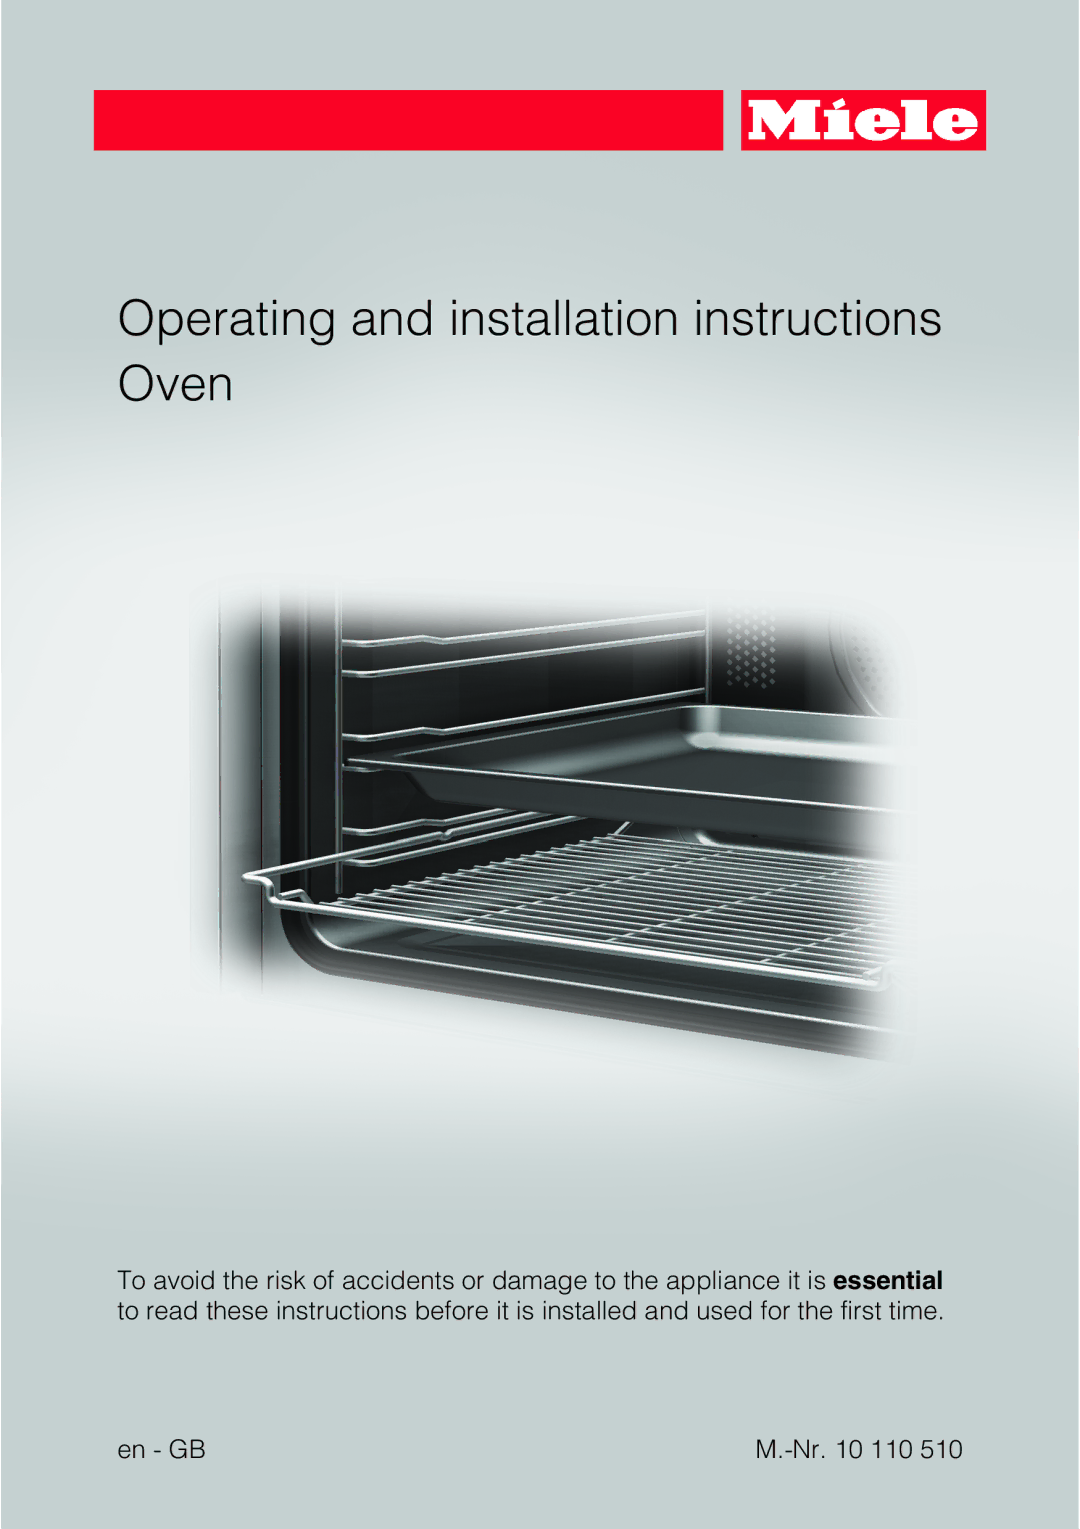 Miele 10 110 510 installation instructions Operating and installation instructions Oven 